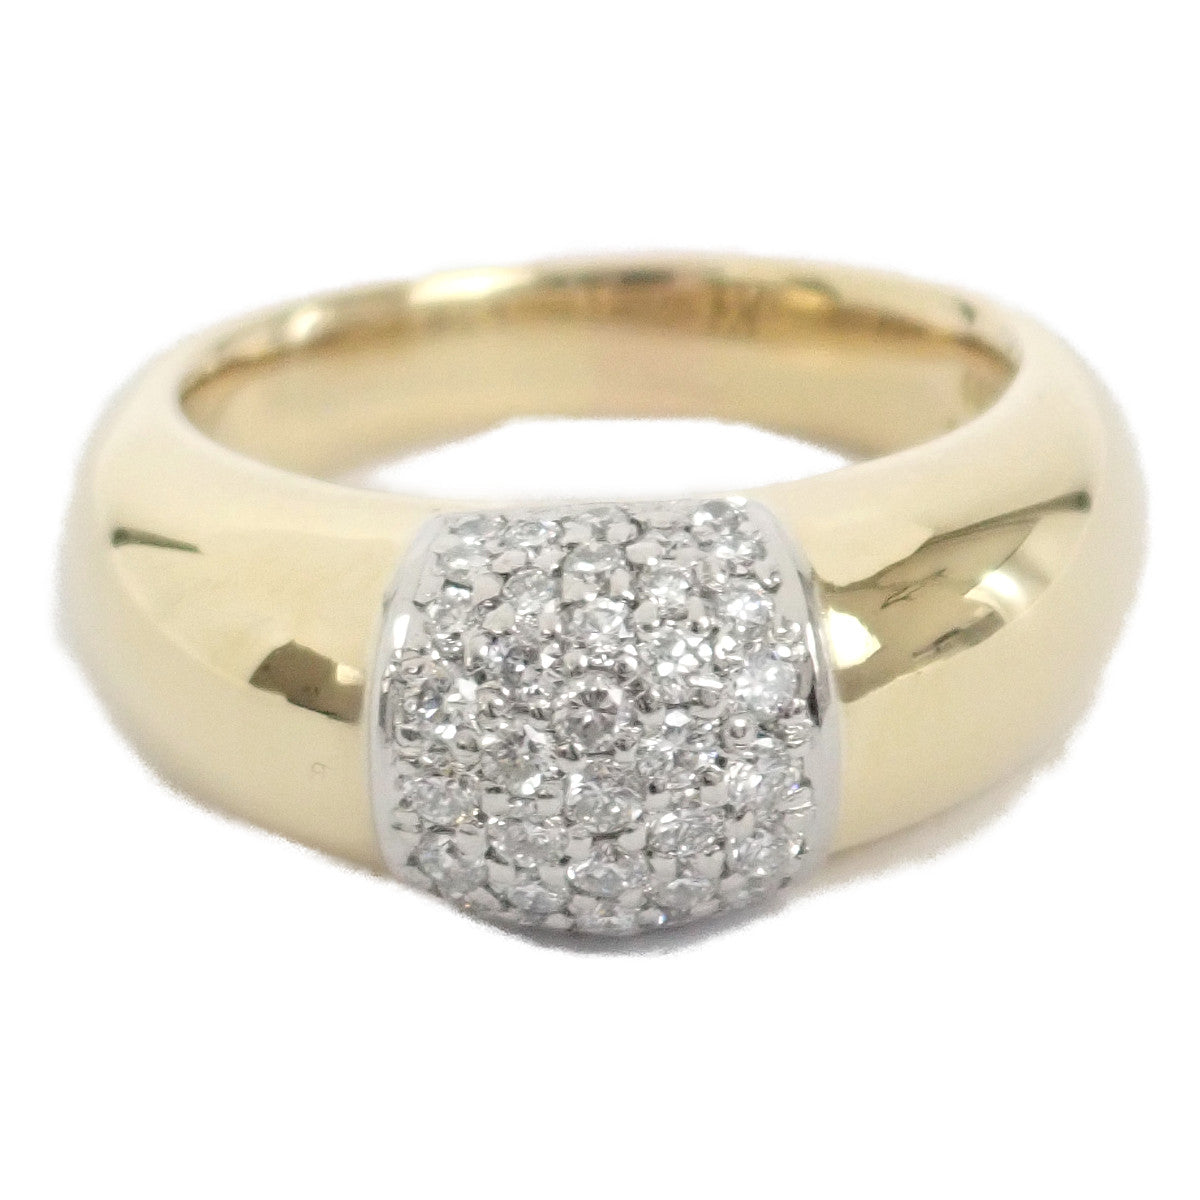 LuxUness  Women's 0.50ct Diamond Ring, Ring Size 13, Design in K18 Yellow Gold/Platinum PT900, Pre-owned in Excellent condition